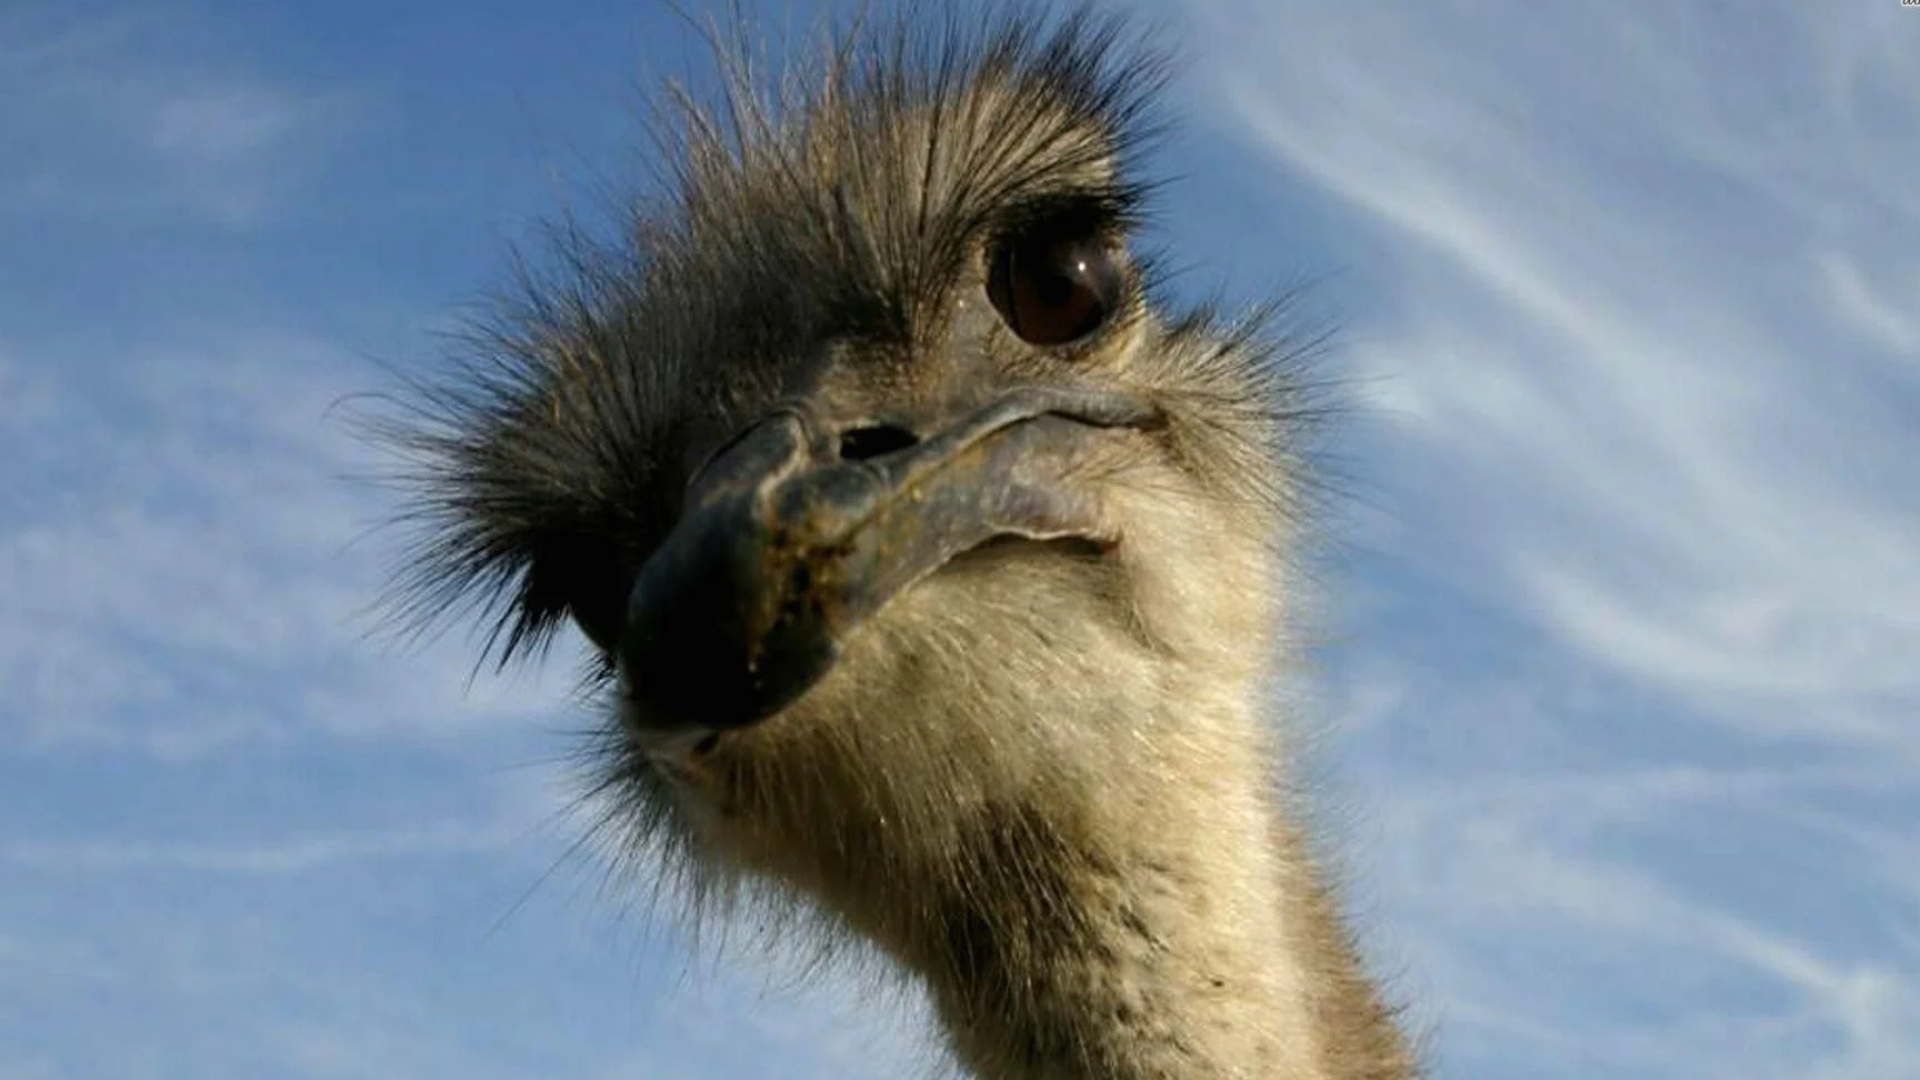 Humorous ostriches, Funny wallpapers, Lighthearted charm, Amusing avians, 1920x1080 Full HD Desktop